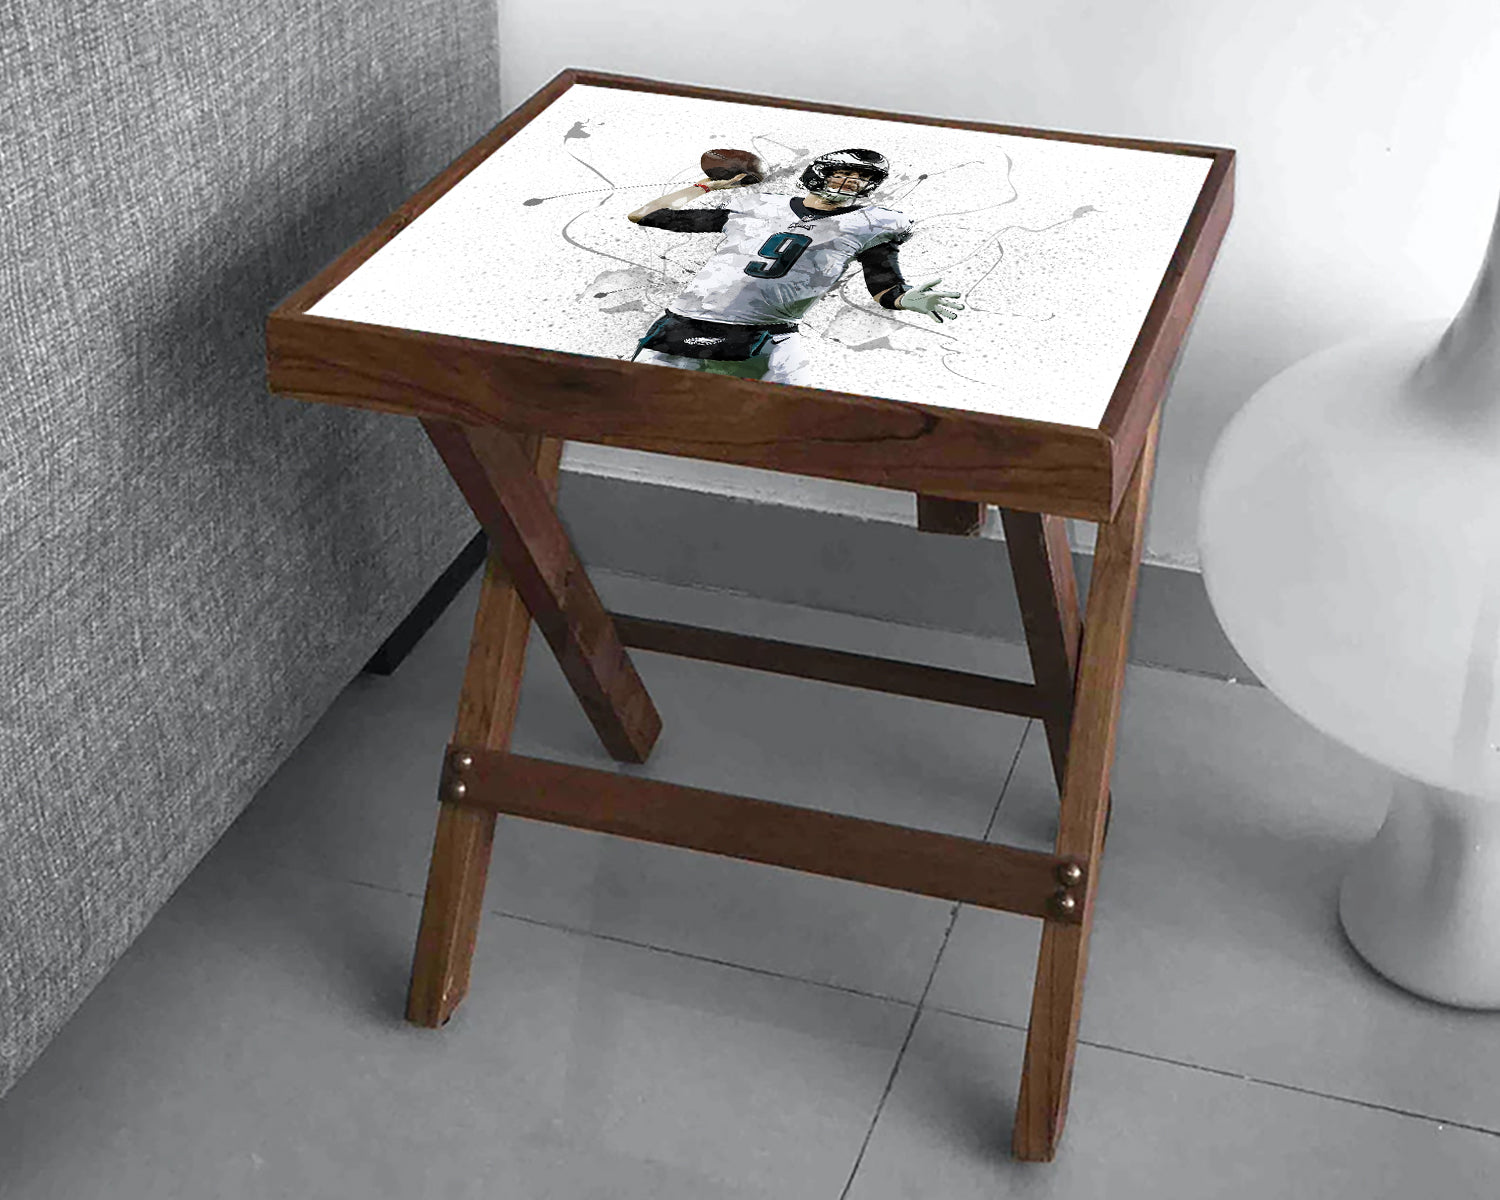 Nick Foles Splash Effect Coffee and Laptop Table 